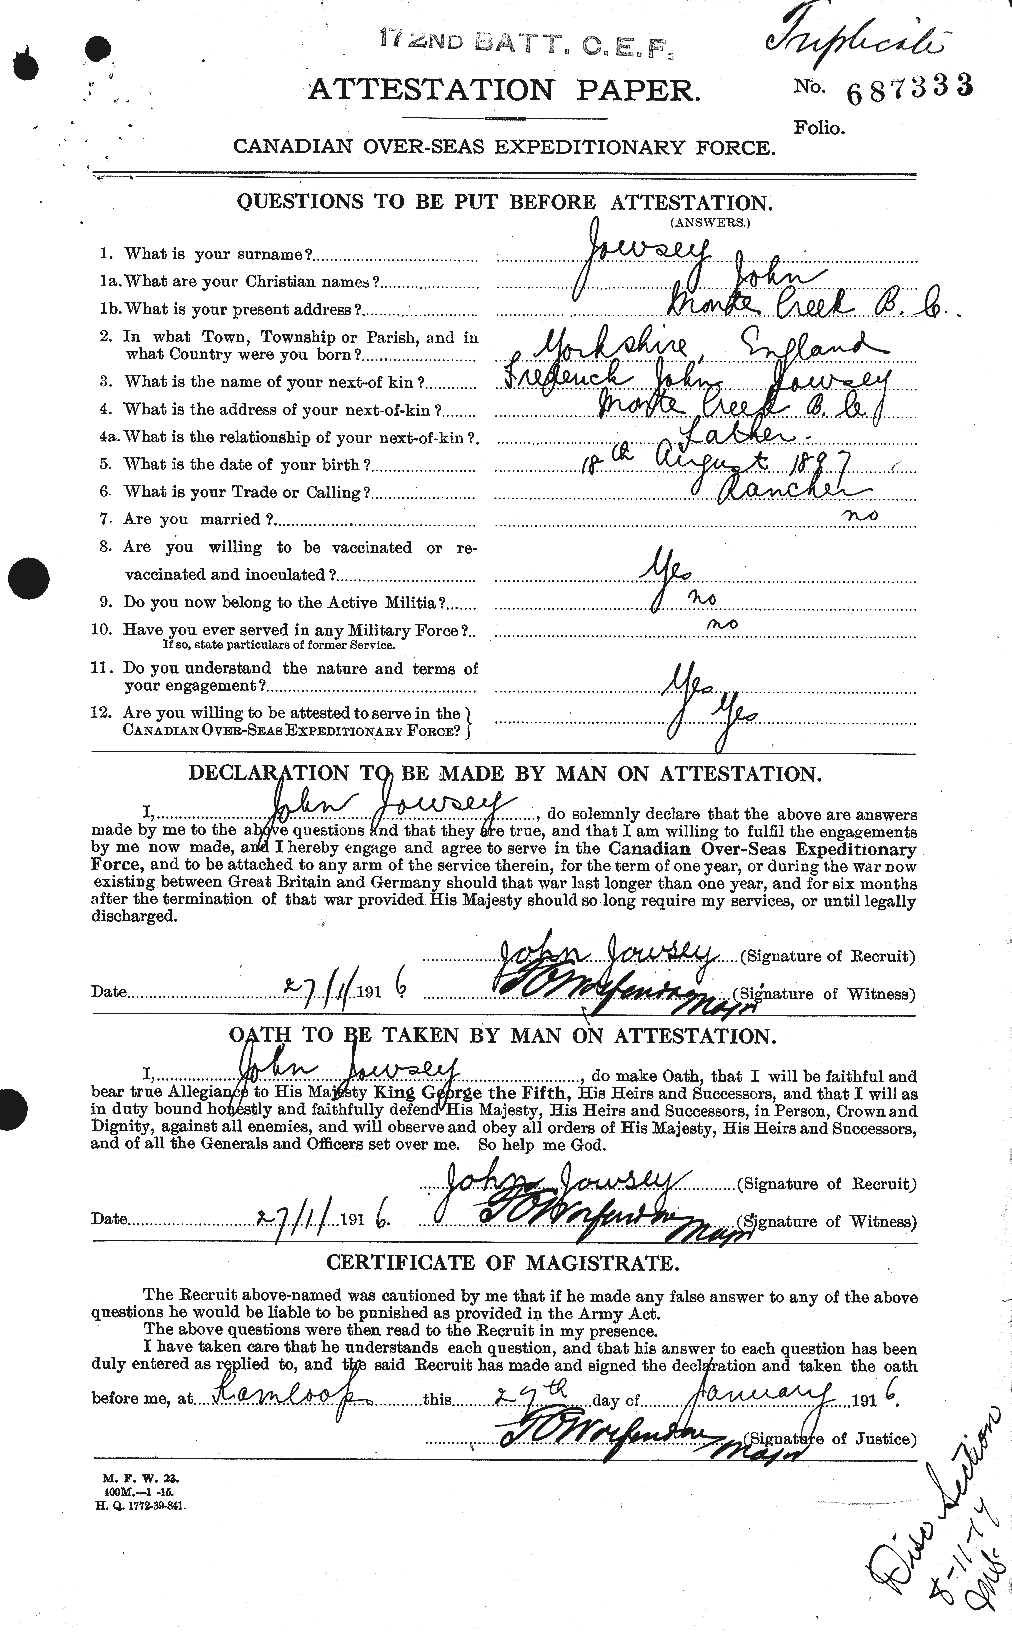 Personnel Records of the First World War - CEF 426348a